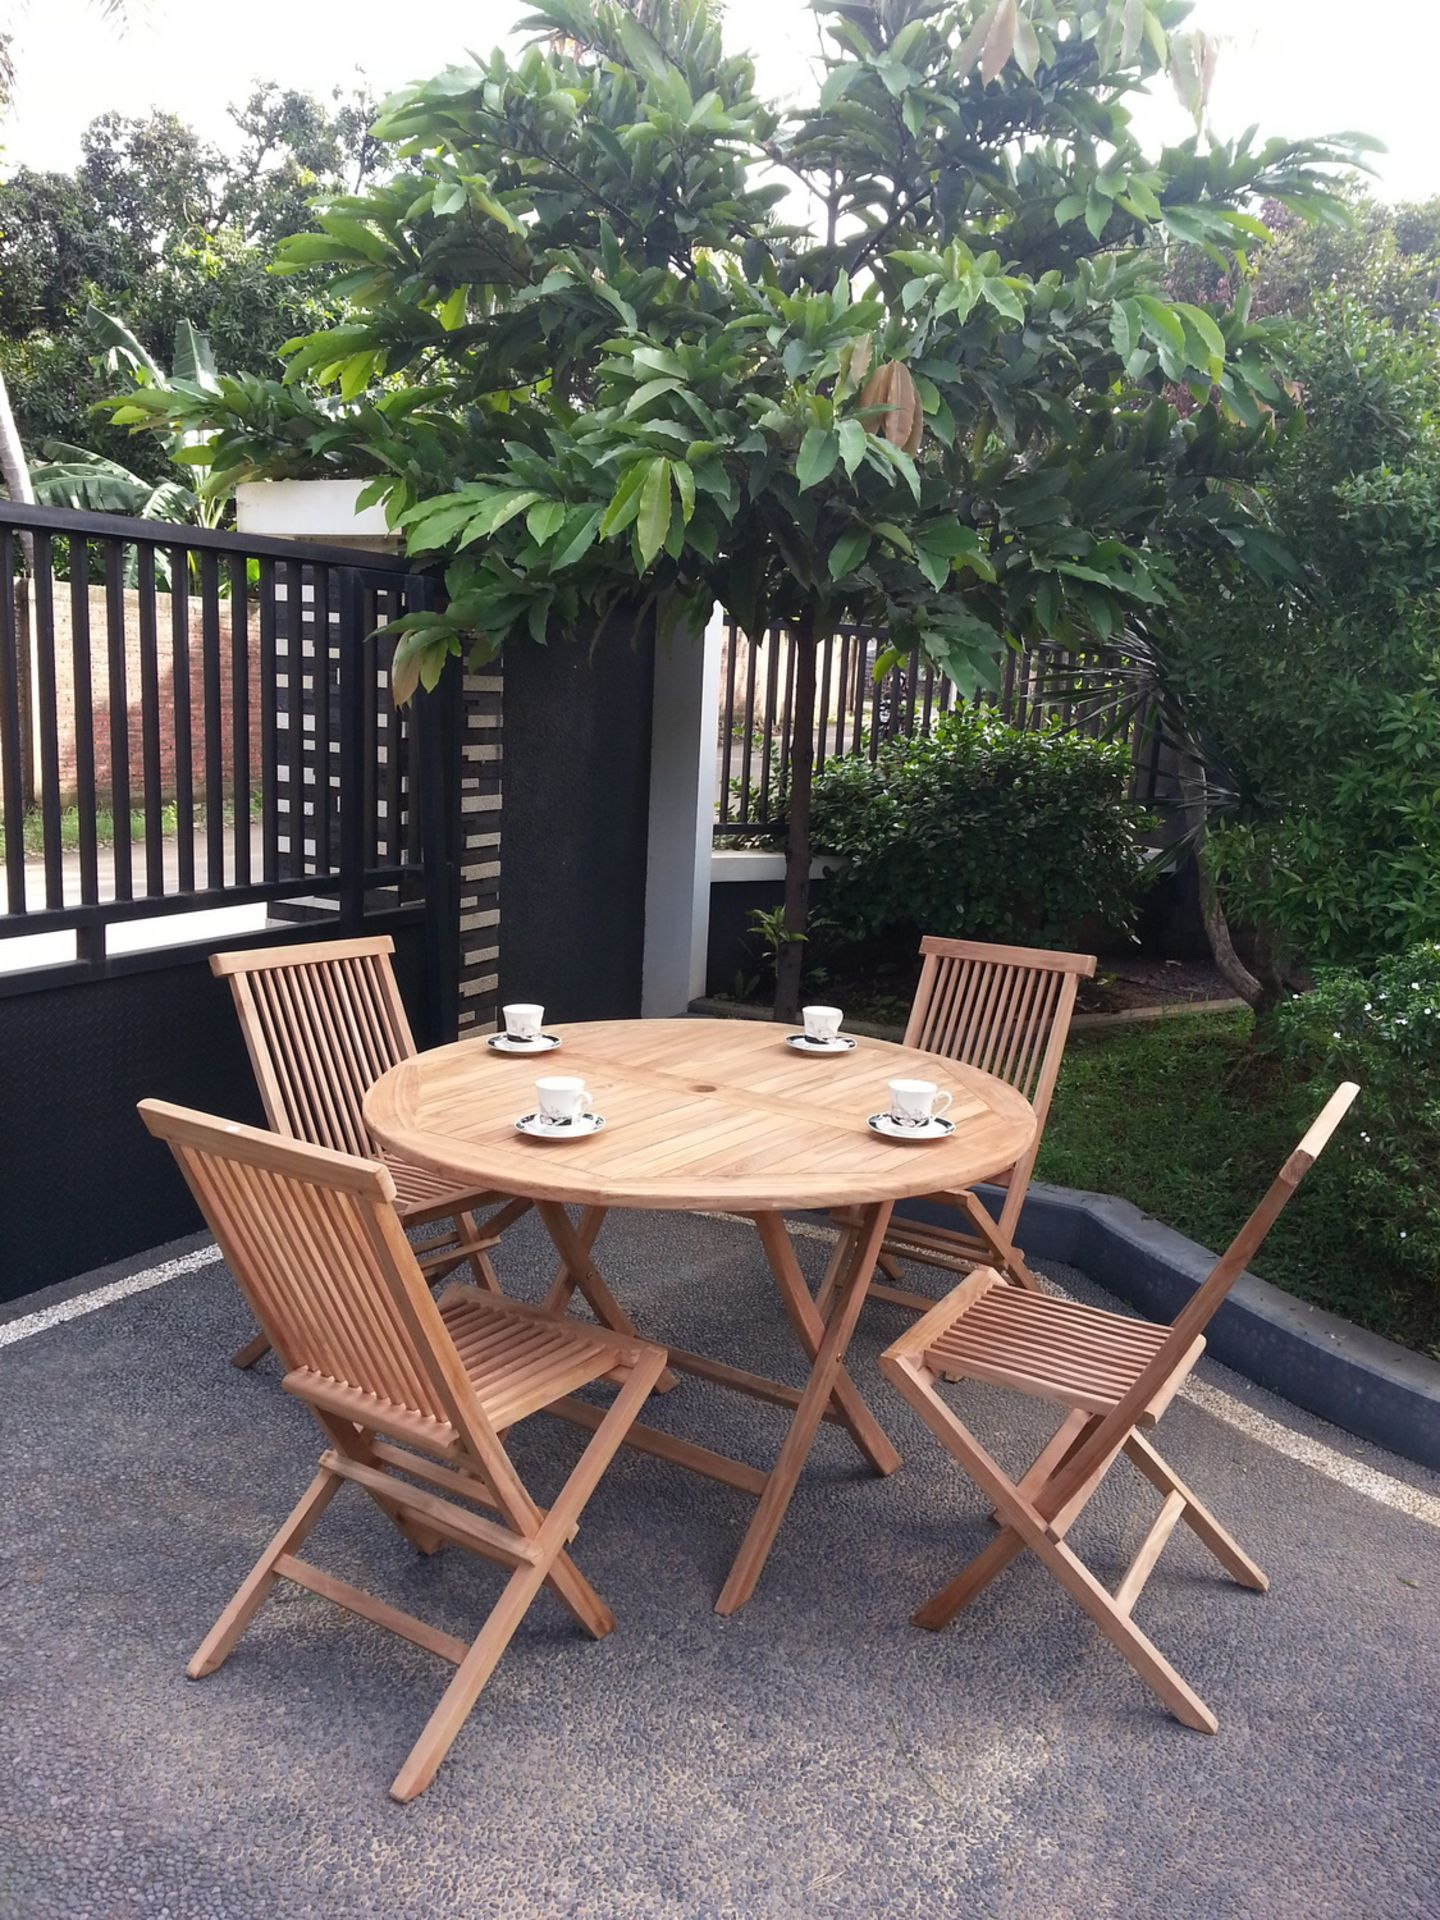 V Brand New Teak 120 cm Folding Table set / including 4 folding chairs / RRP ú754/ NOTE: Item is